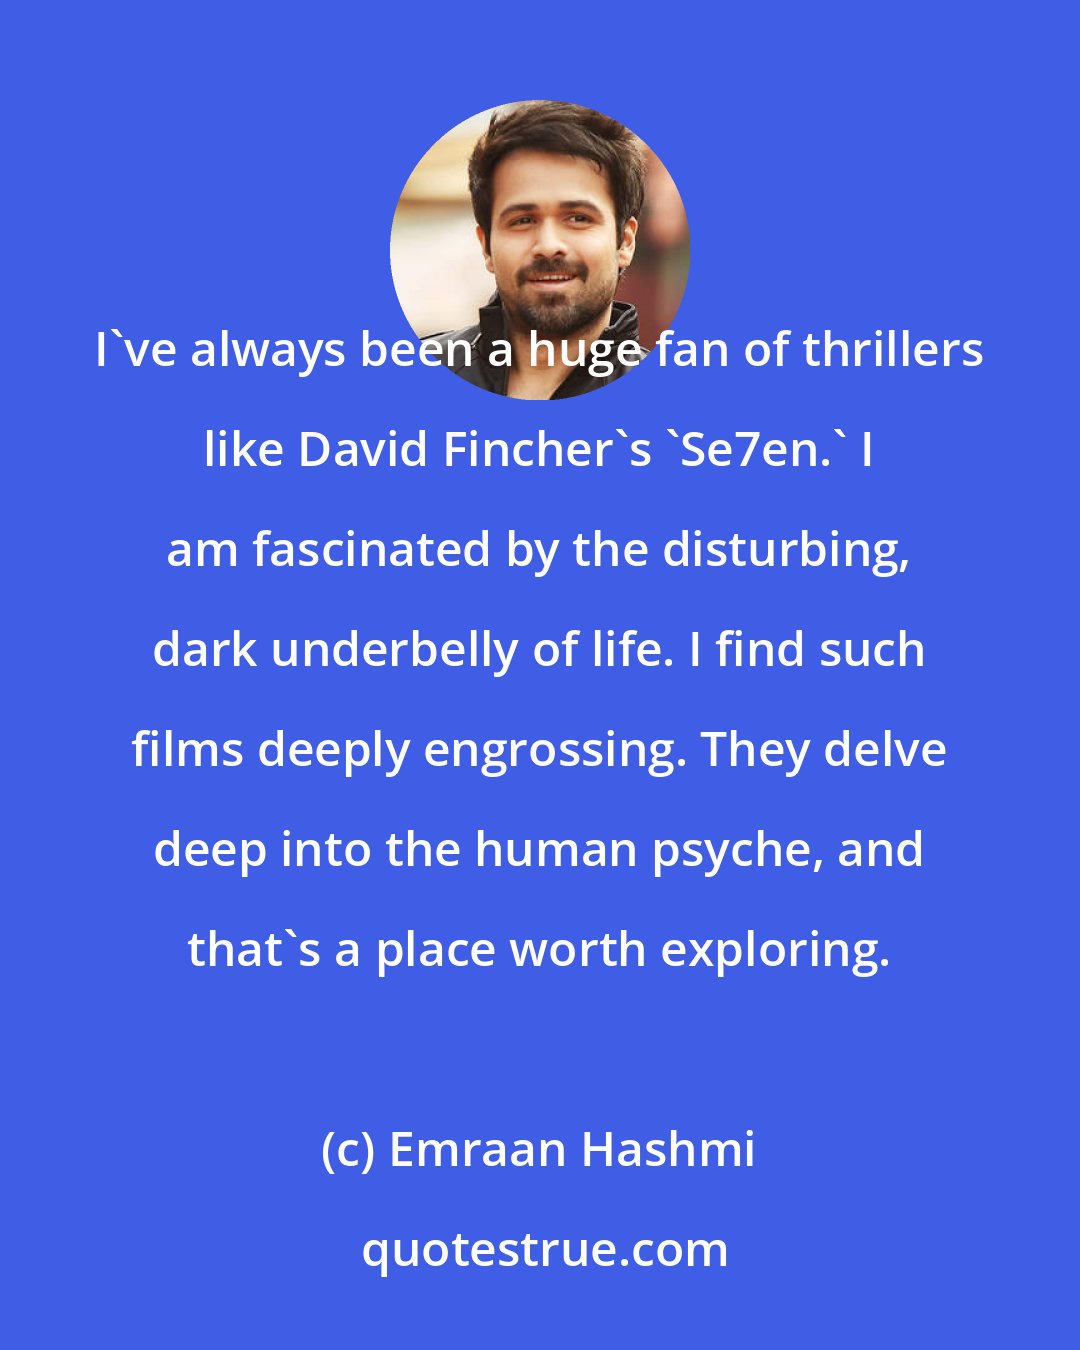 Emraan Hashmi: I've always been a huge fan of thrillers like David Fincher's 'Se7en.' I am fascinated by the disturbing, dark underbelly of life. I find such films deeply engrossing. They delve deep into the human psyche, and that's a place worth exploring.